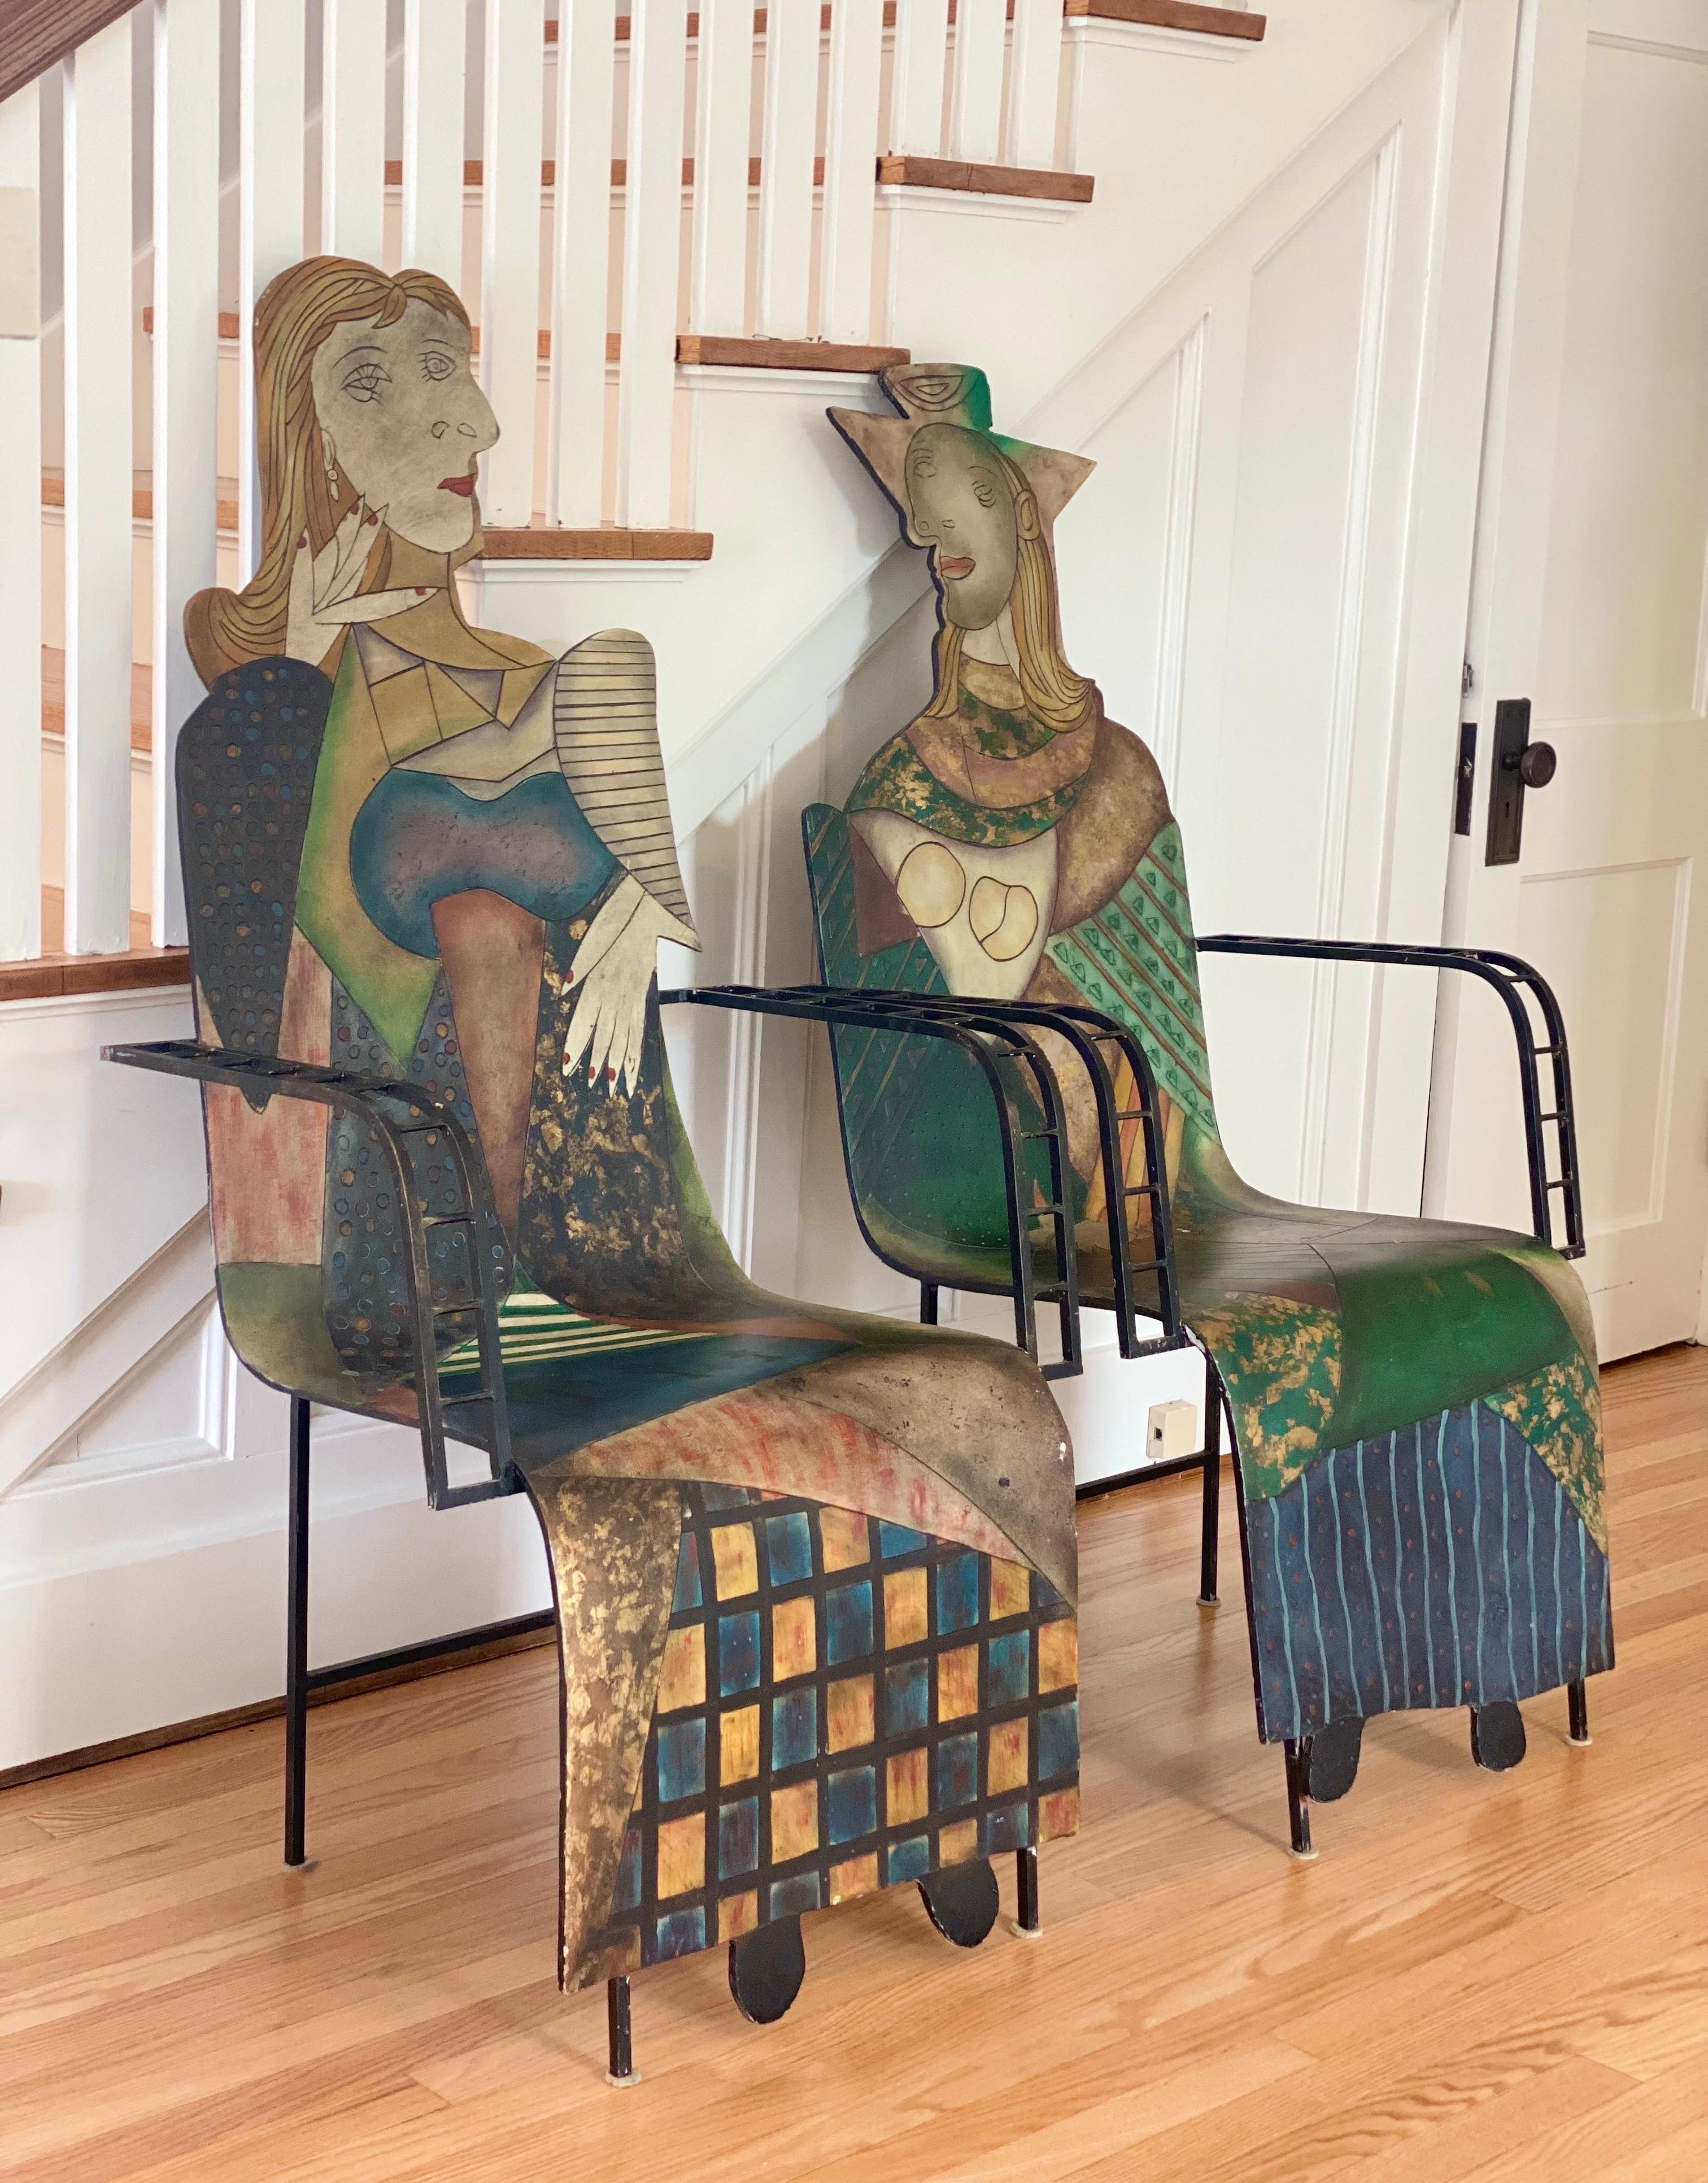 We are very pleased to offer a pair of sculptural chairs inspired in the works of Spanish painter Pablo Picasso, circa the 1970s. One of the most influential artists of the Twentieth Century, he is known for co-founding the Cubist movement, the